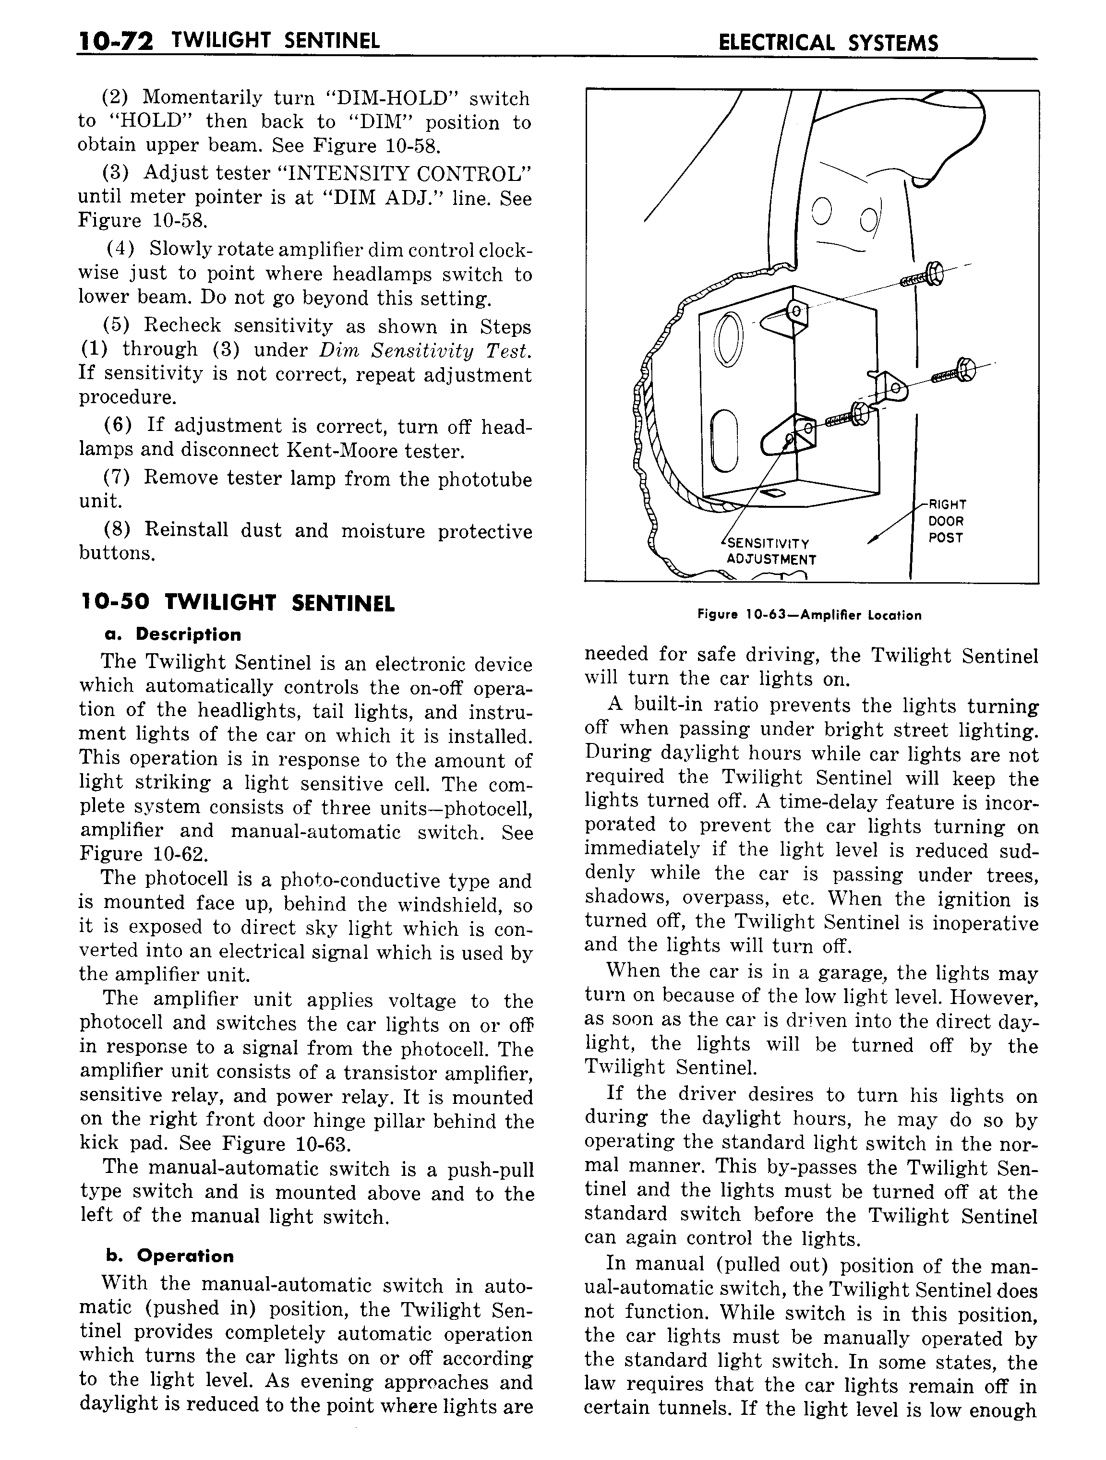 n_11 1960 Buick Shop Manual - Electrical Systems-072-072.jpg